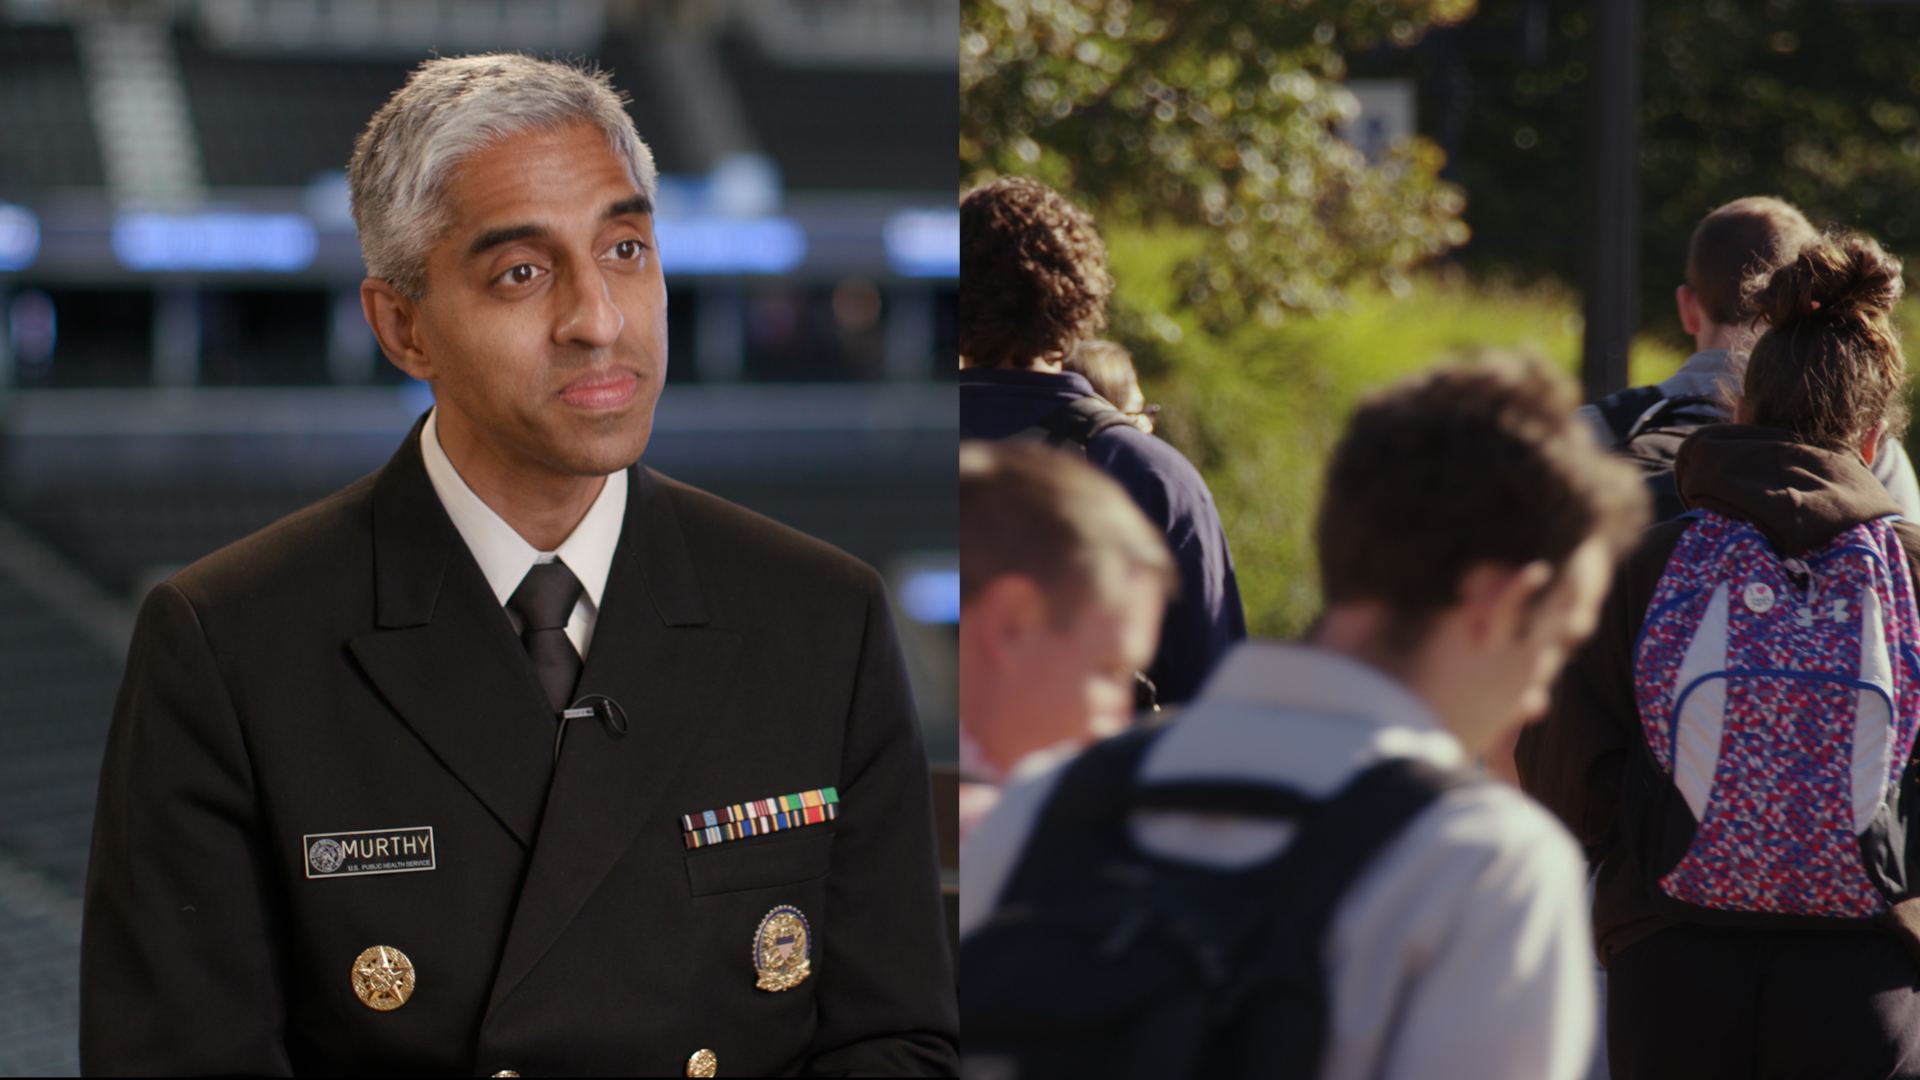 U.S. Surgeon General: Gen Z is 'particularly hard hit' by the loneliness epidemic